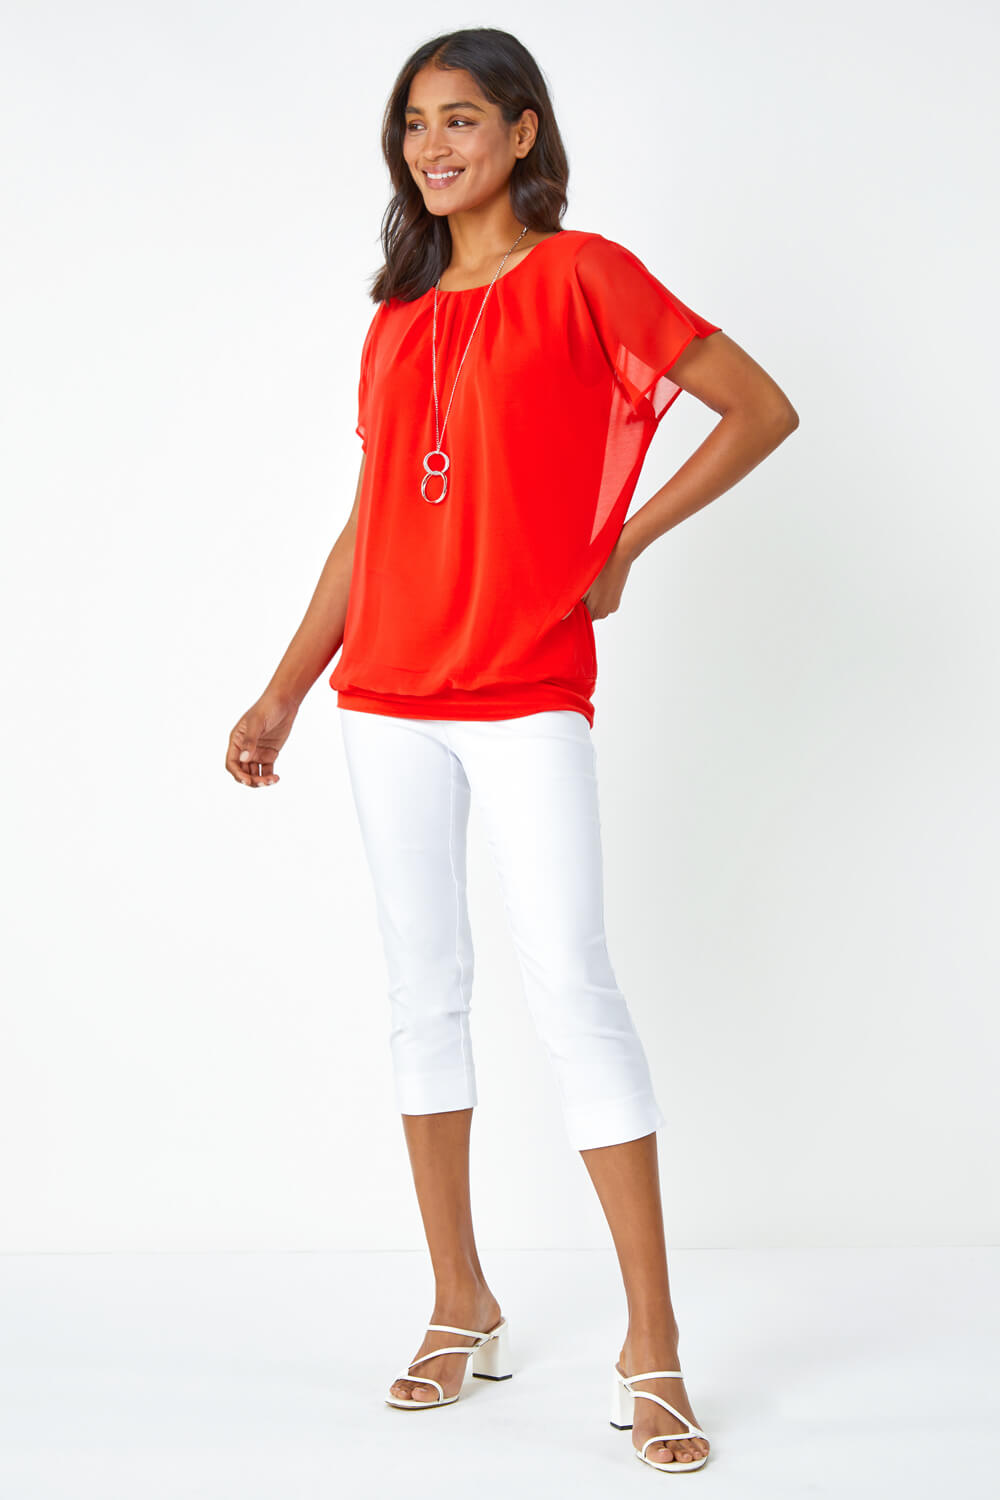 ORANGE Chiffon Jersey Blouson Top with Necklace, Image 2 of 5